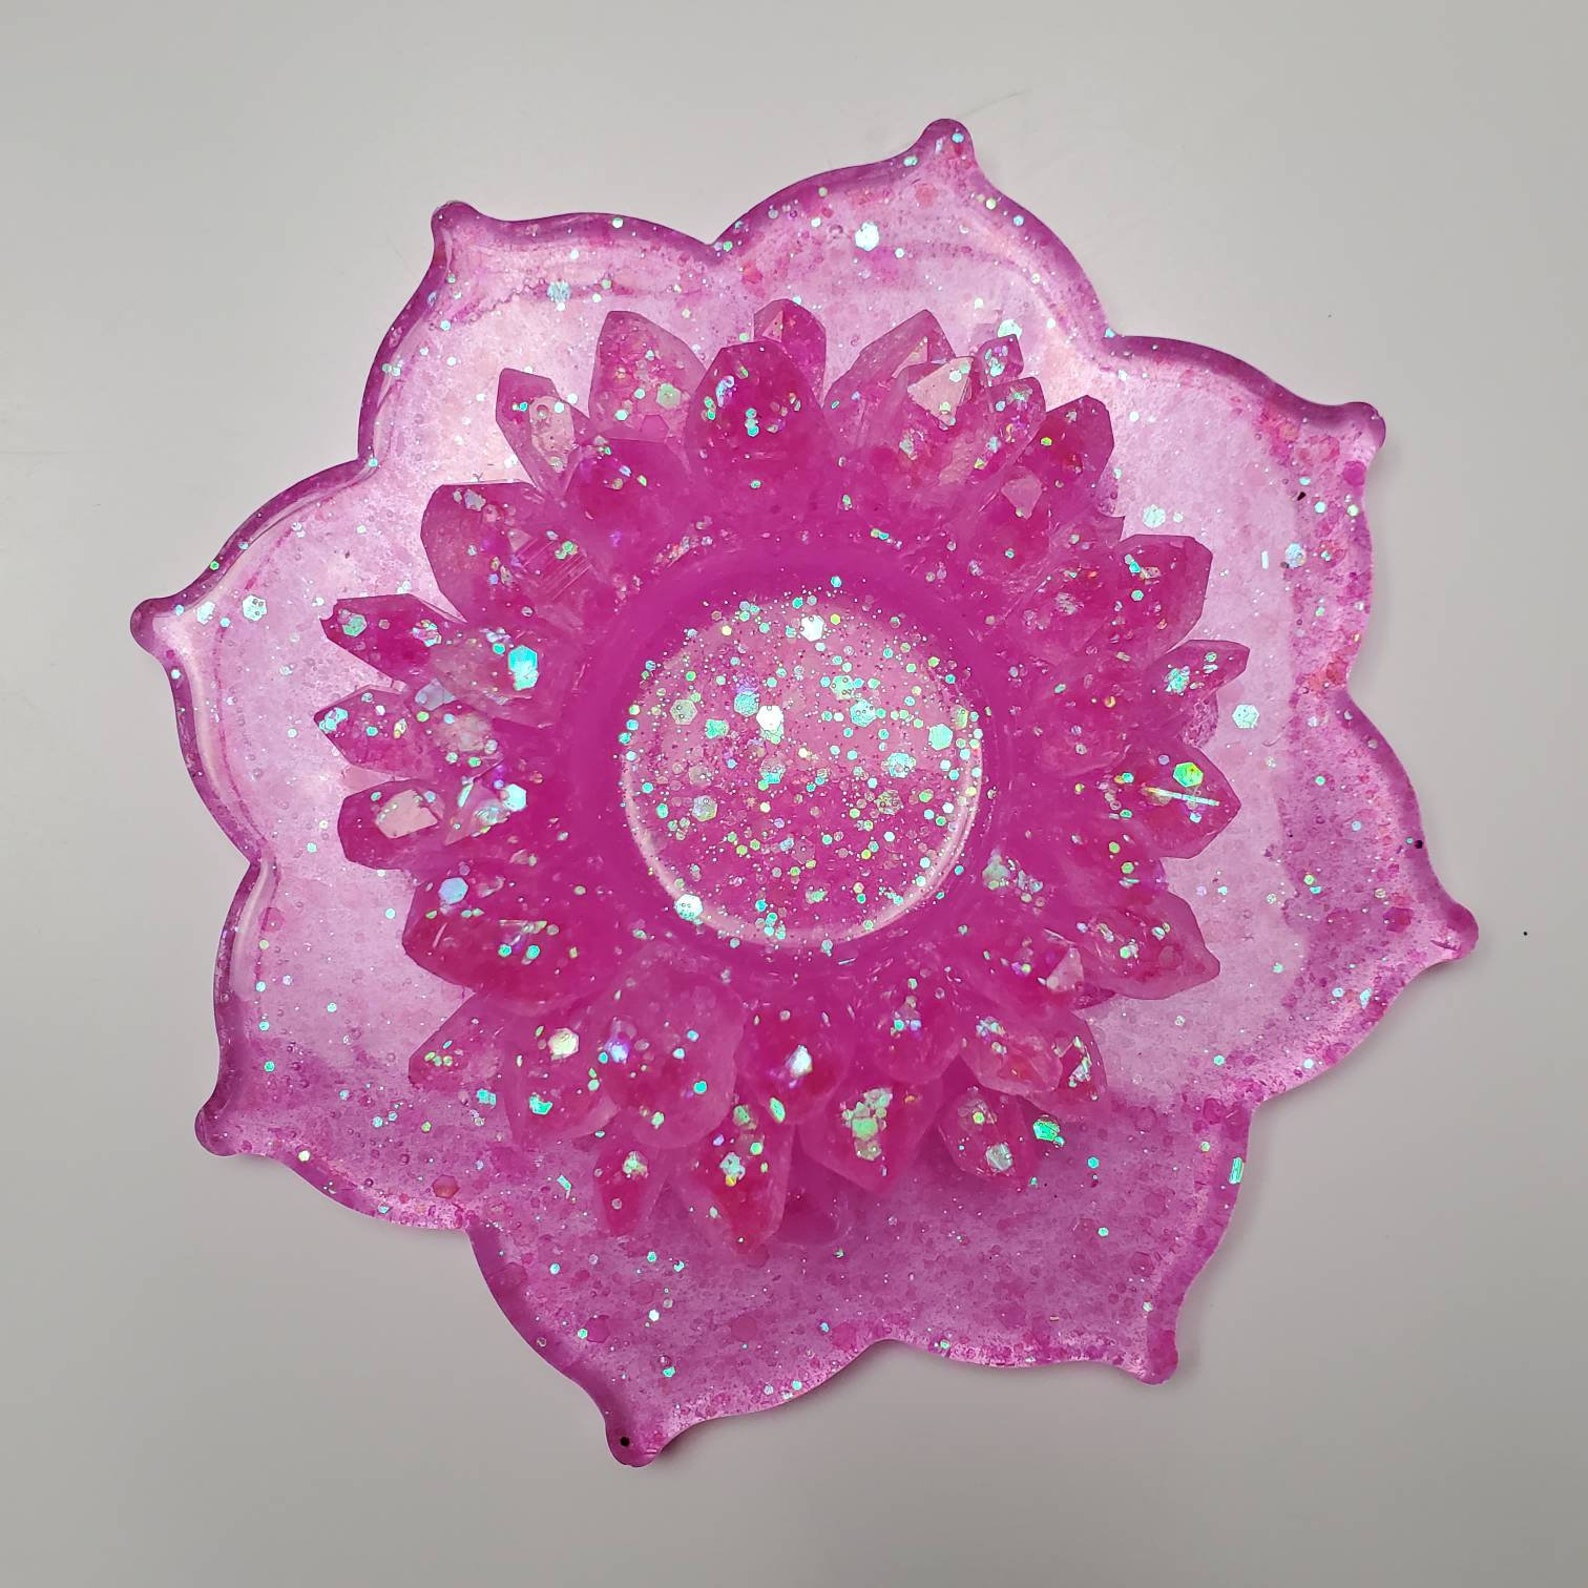 Lotus Flower Pink Lotus Flower Resin Candle Holders Candle Etsy